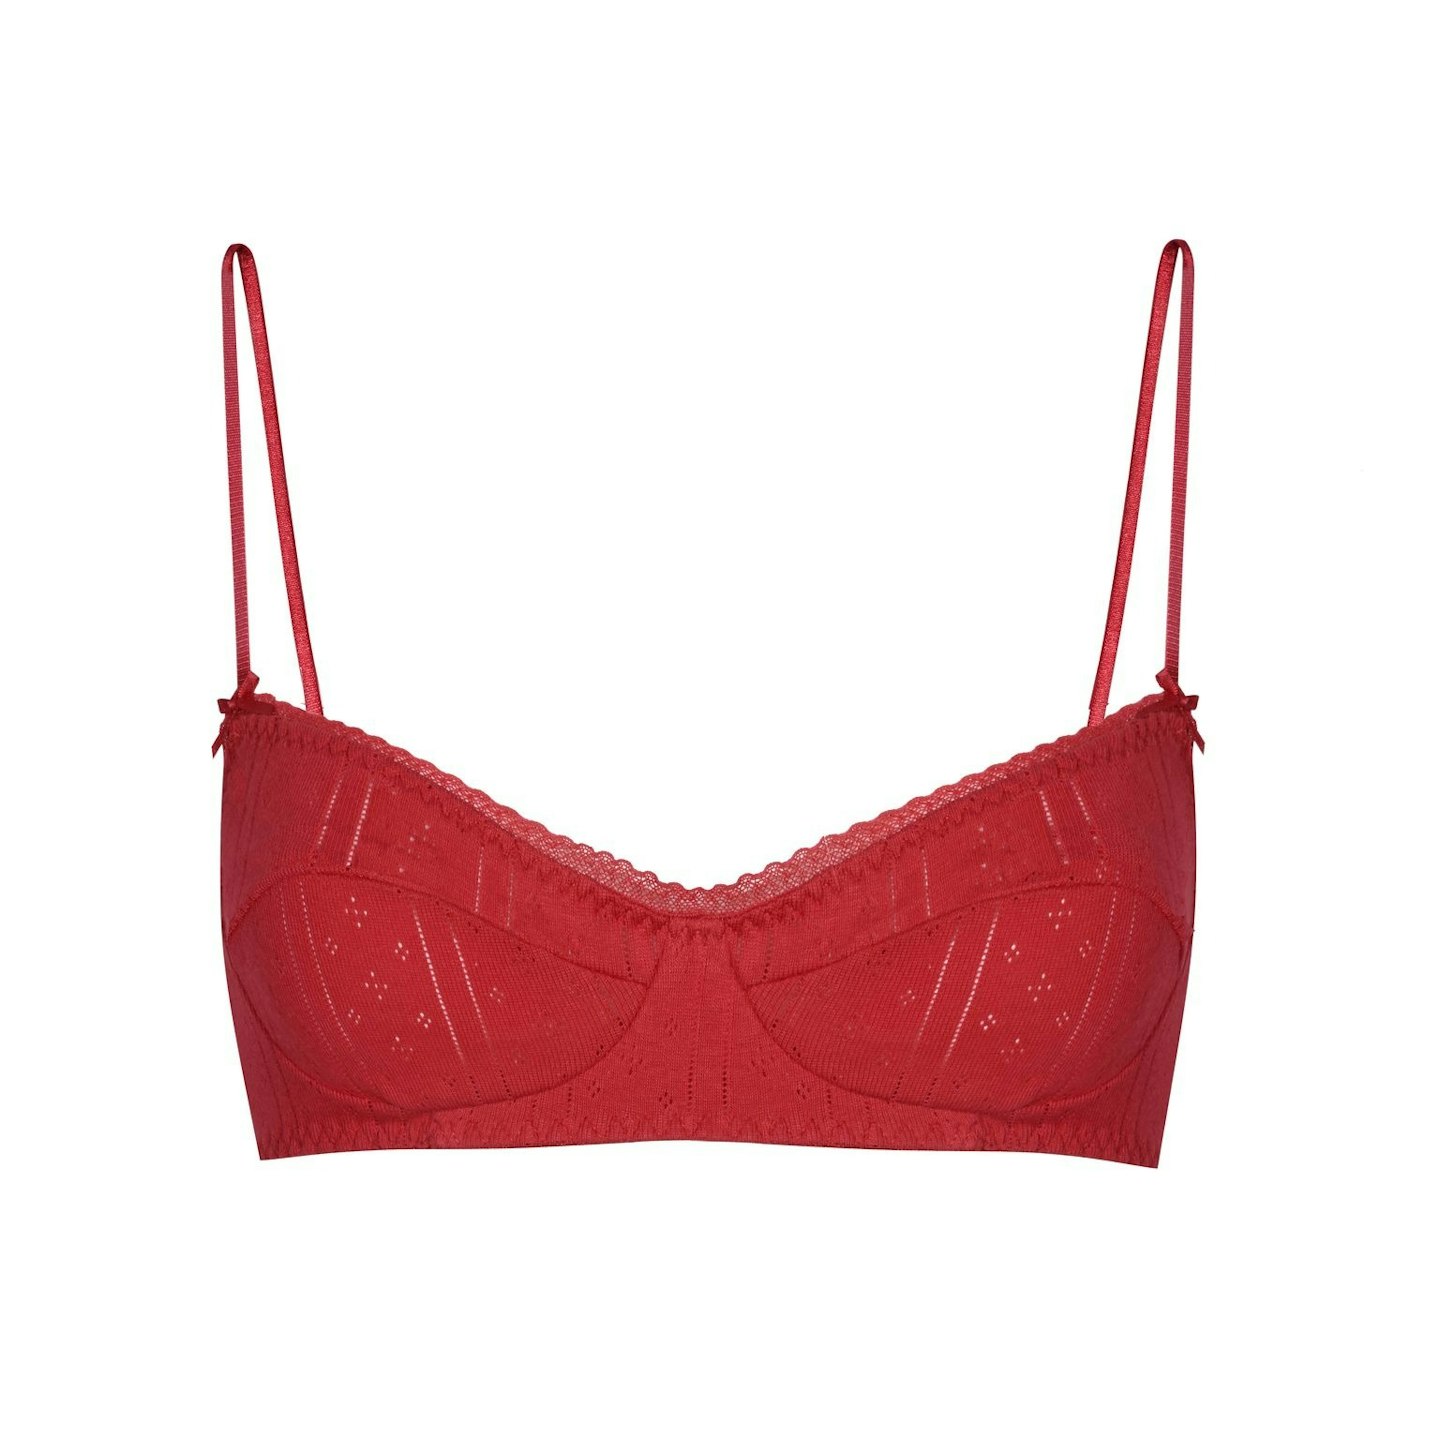 CouCou Intimates, The Balconette